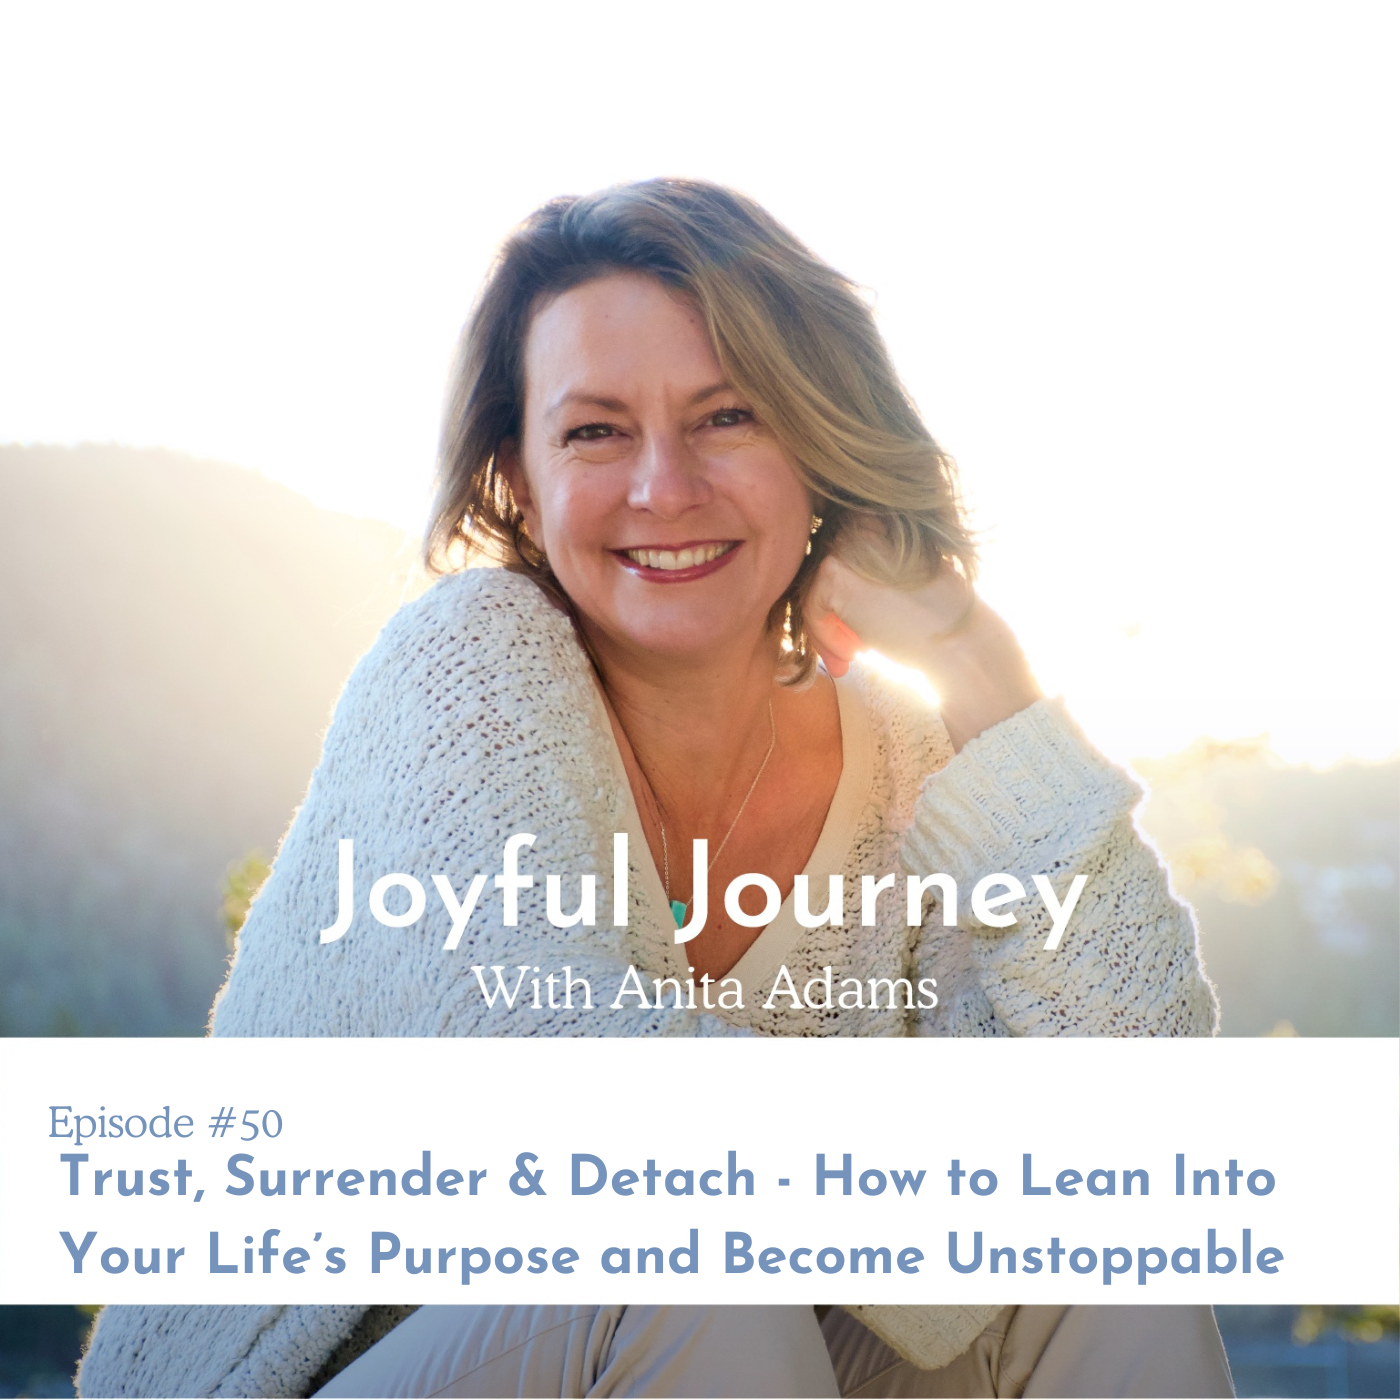 Trust, Surrender & Detach - How to Lean Into Your Life’s Purpose and Become Unstoppable